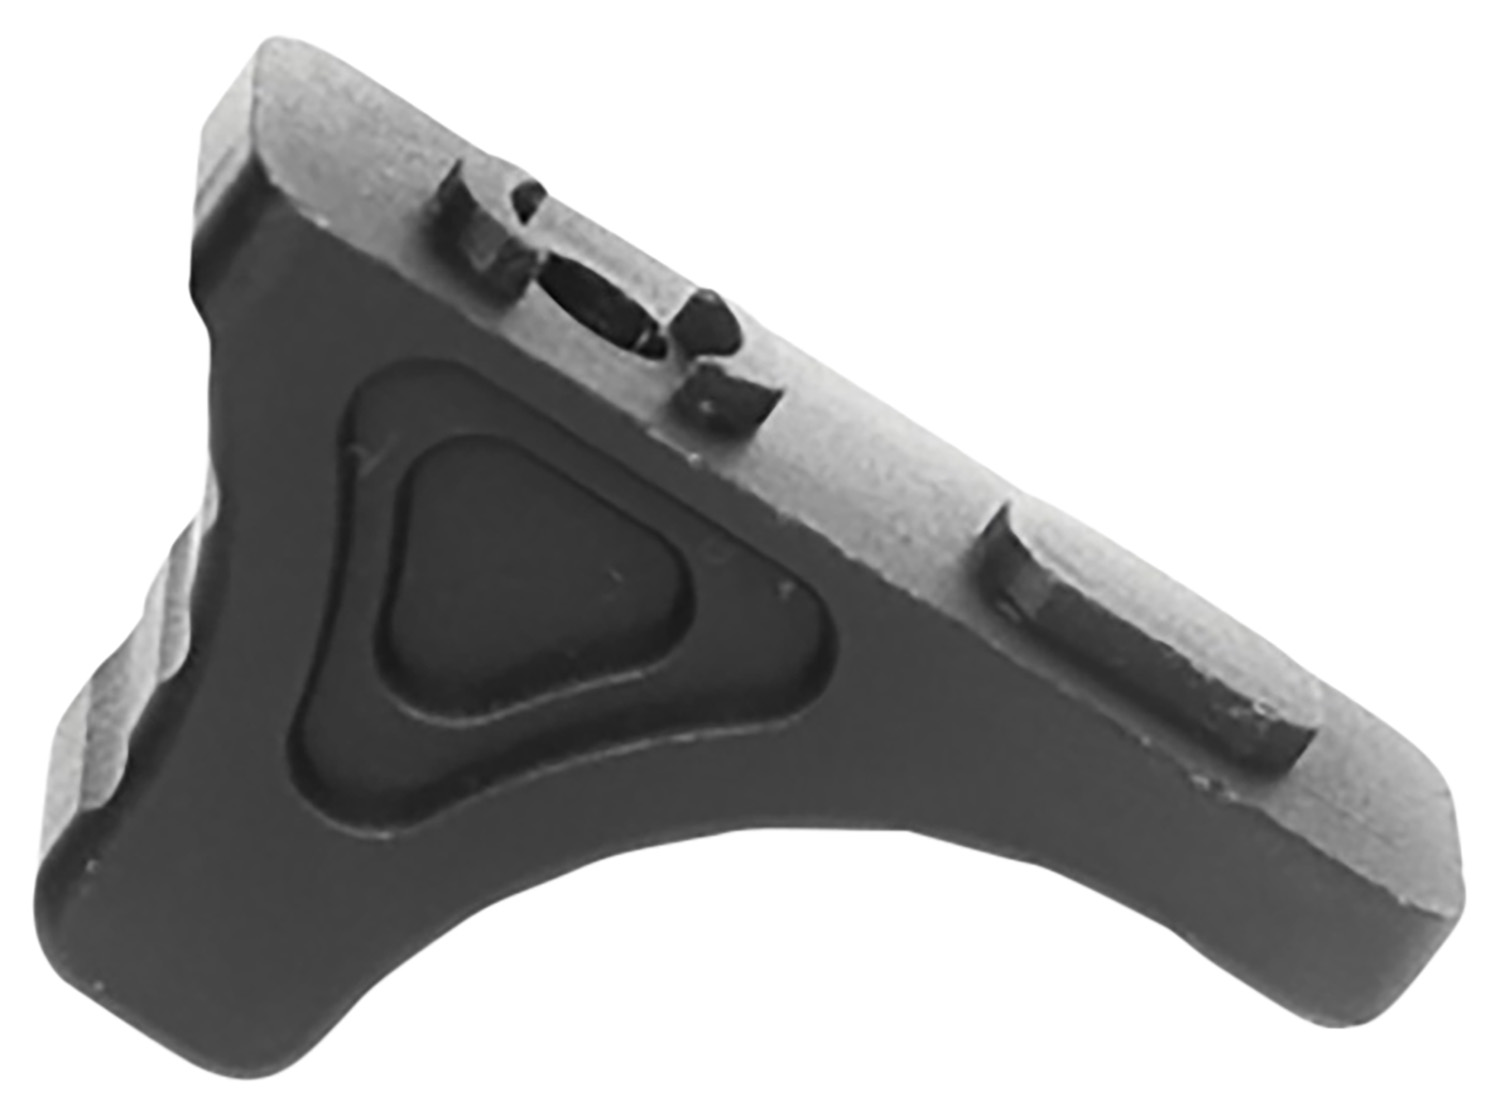 Bowden Tactical J26030 AR-Chitec Micro Handstop made of 6061-T6 Aluminum with Black Hardcoat Anodized Finish, M-LOK Mount Type & Reversible for AR-15 Includes Mounting Hardware